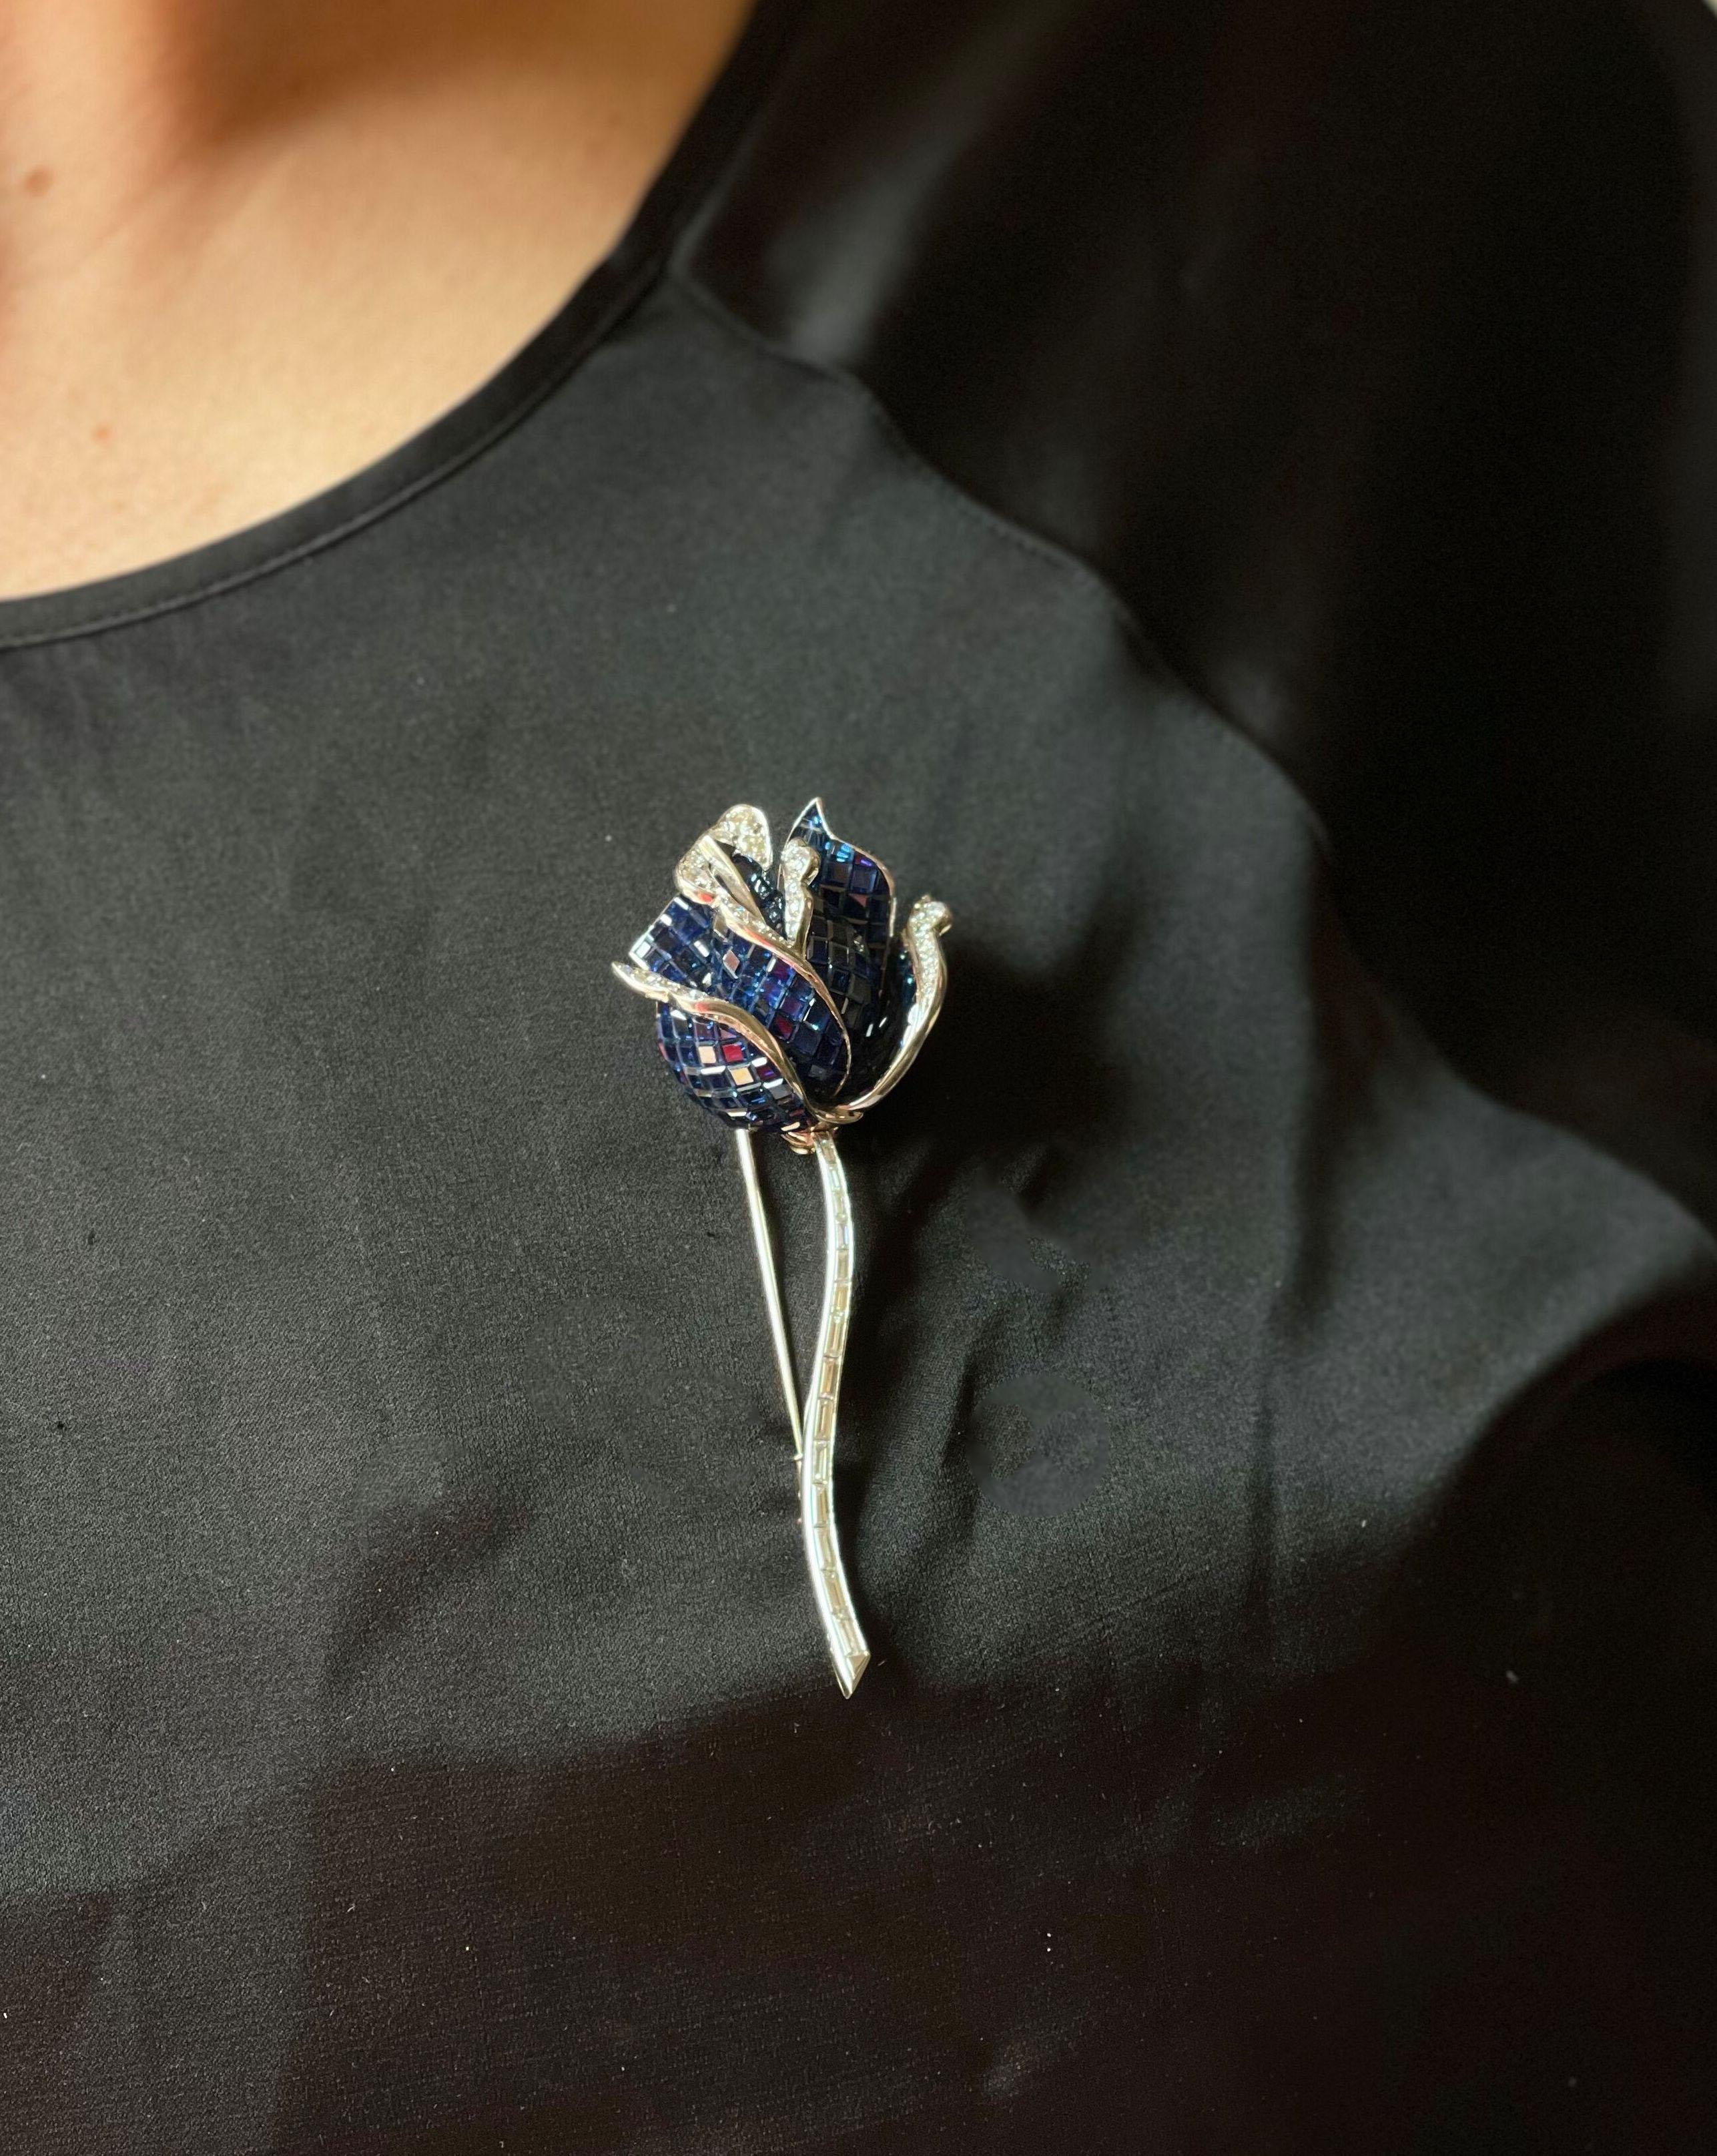 French made exquisite rose flower brooch, in 18k gold, featuring vibrant invisible set sapphires and approx. 1.00ctw G/VS diamonds. Brooch is 3.5